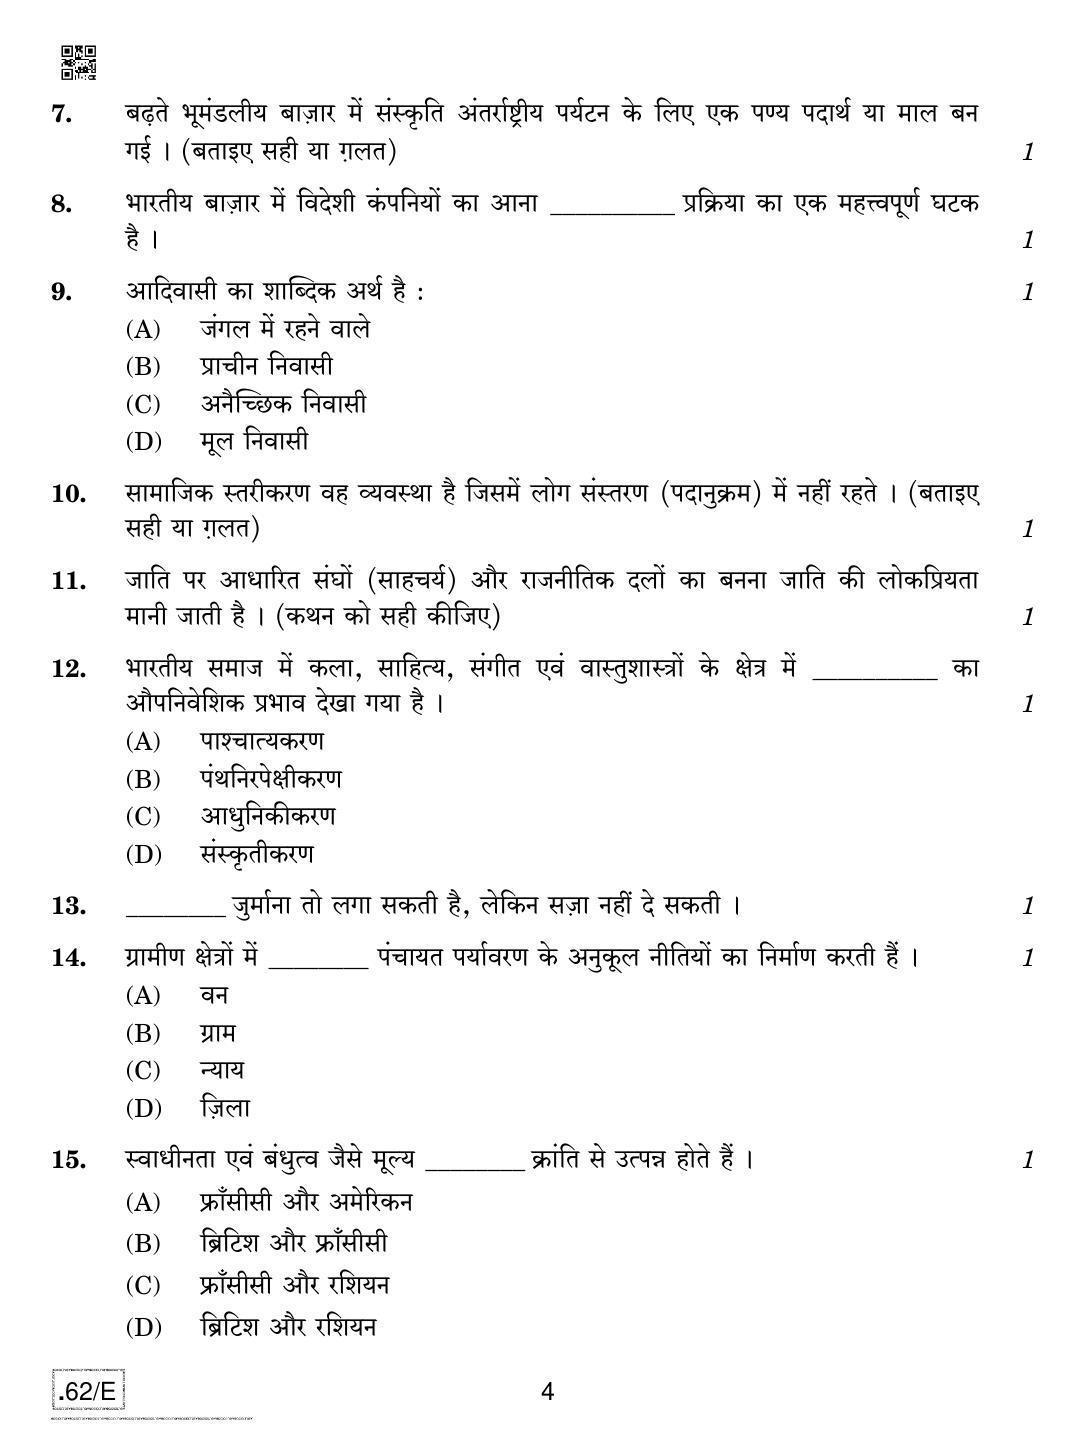 CBSE Class 12 Sociology 2020 Compartment Question Paper - Page 4